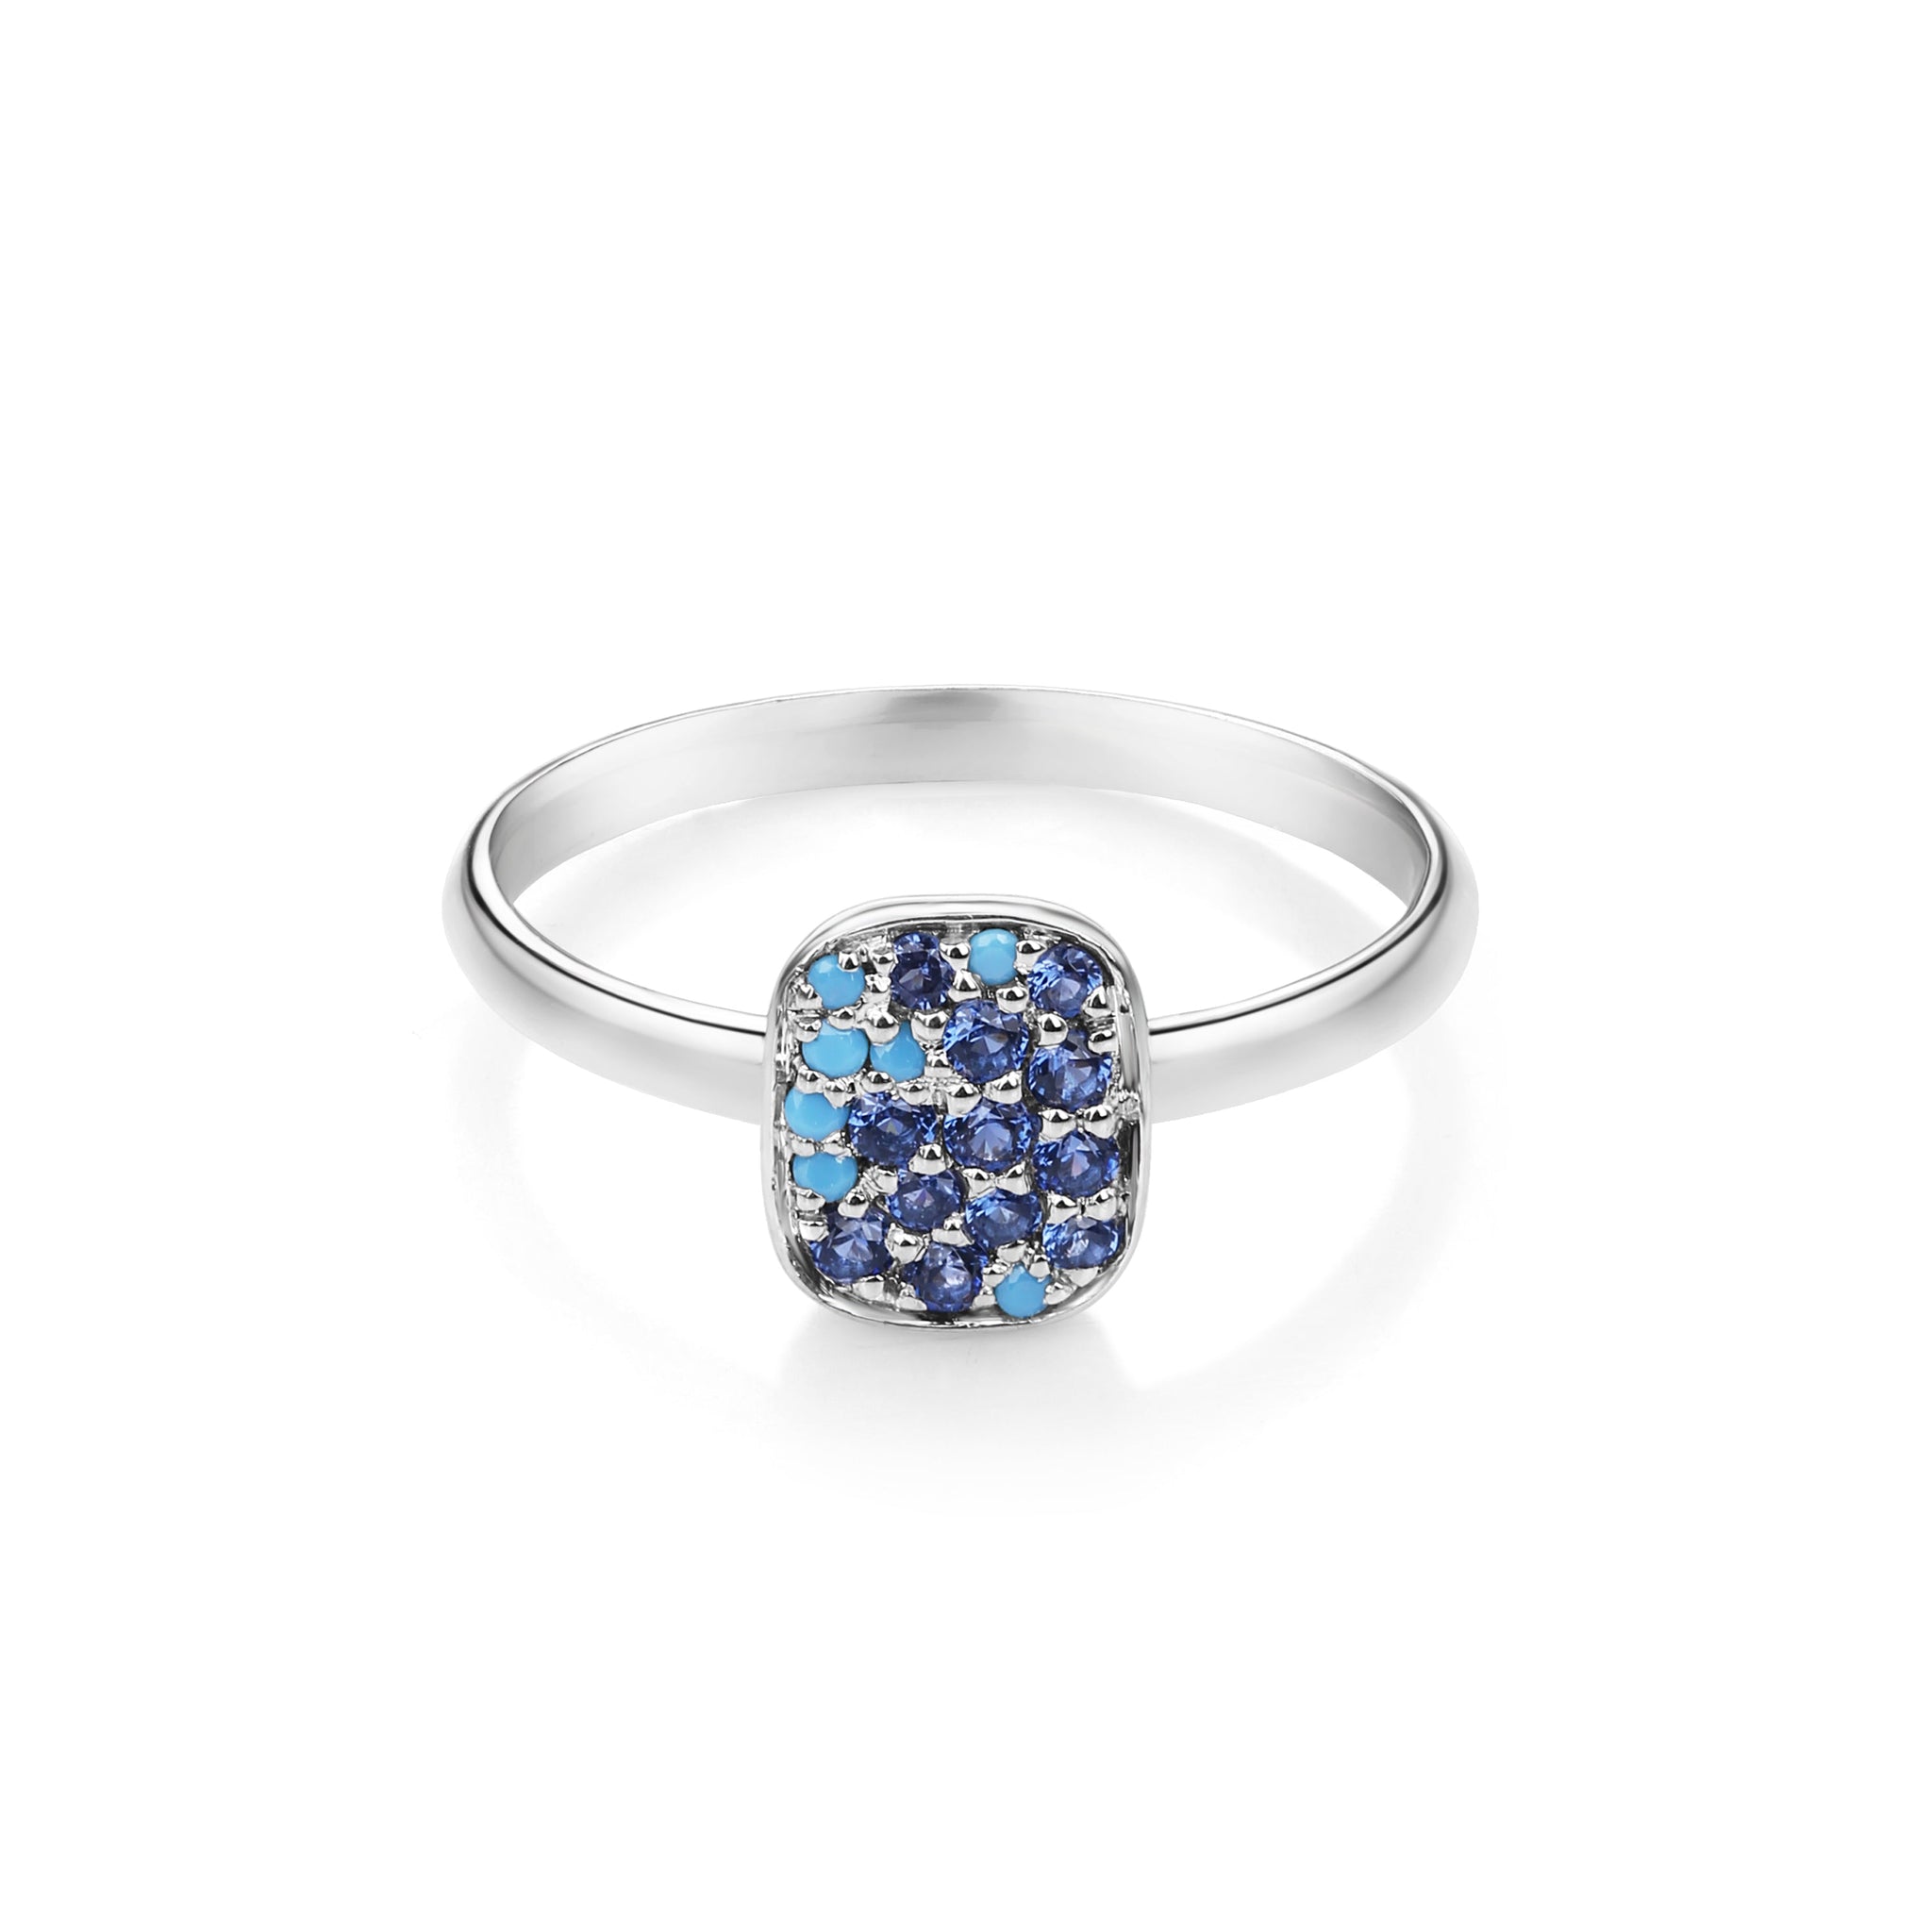 The Show Stopper Ring - Blue Lagoon